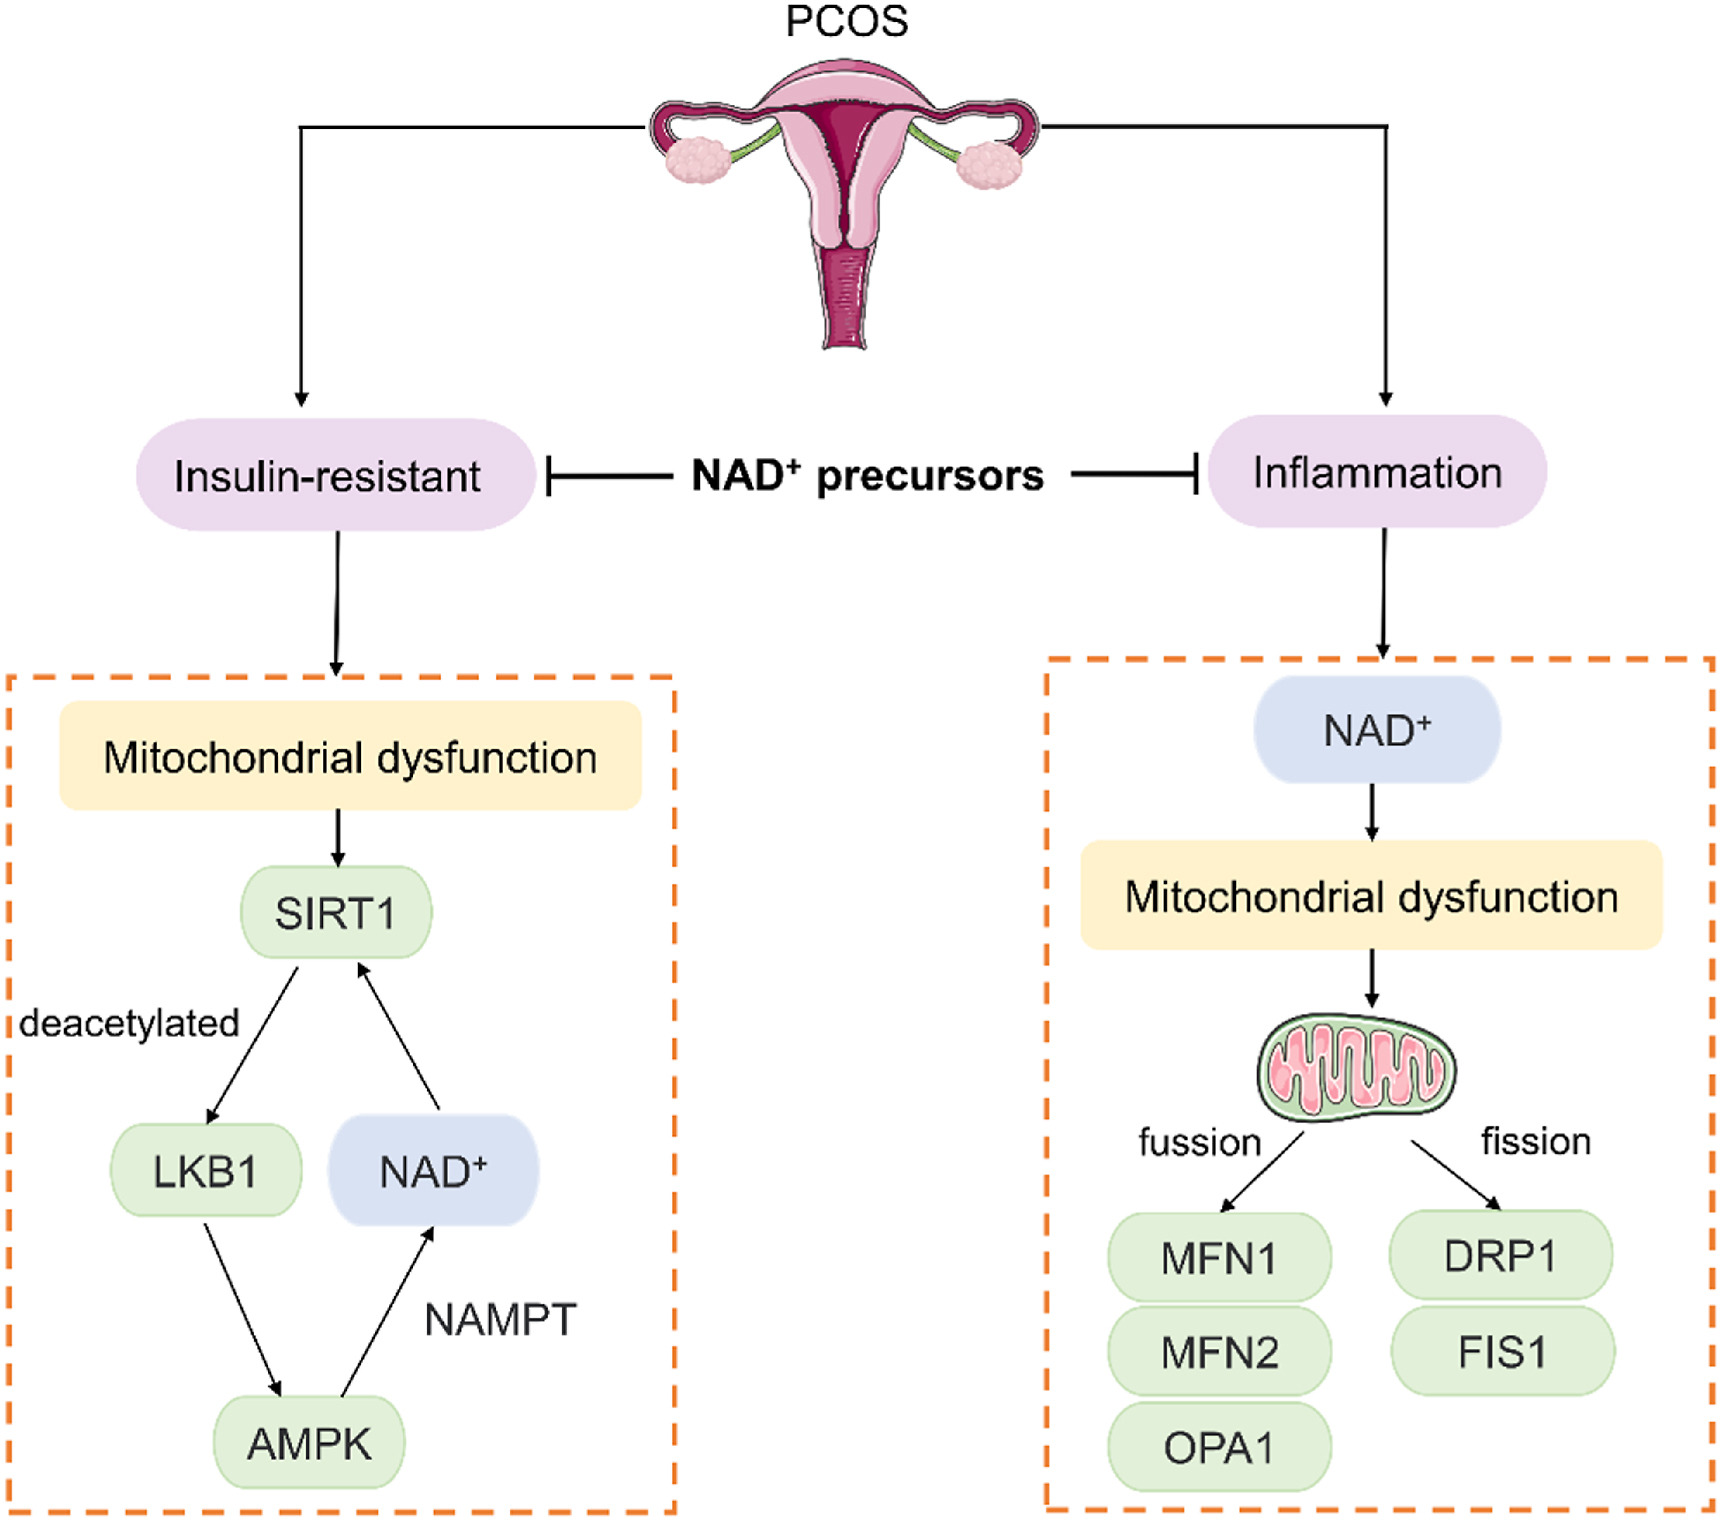 What are the effects of supplementing NAD+ and its precursors on women?